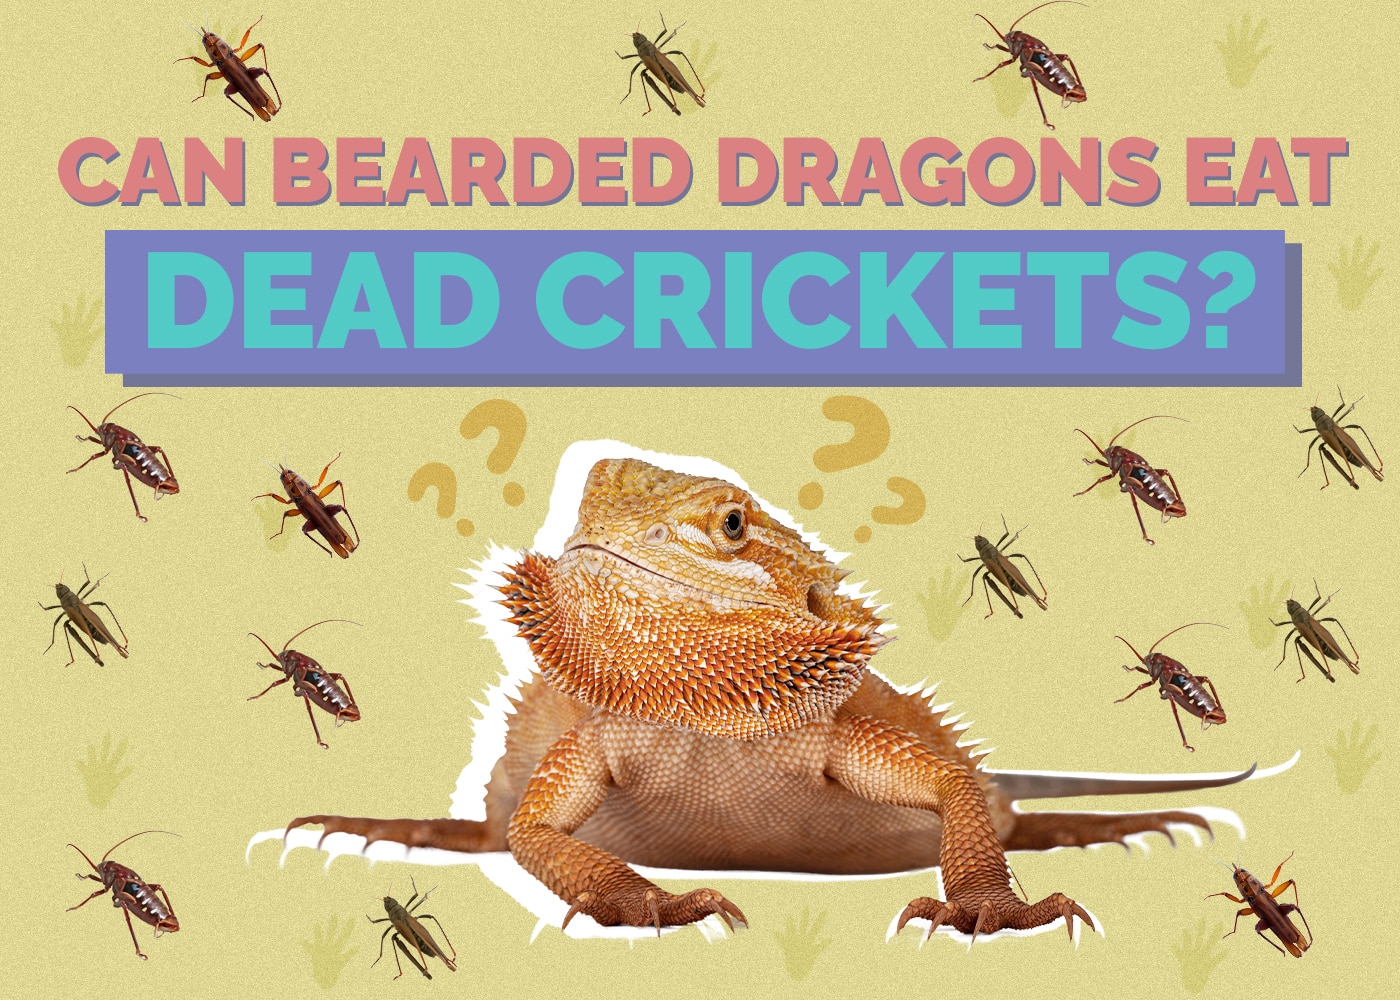 Can Bearded Dragons Eat Dead Crickets